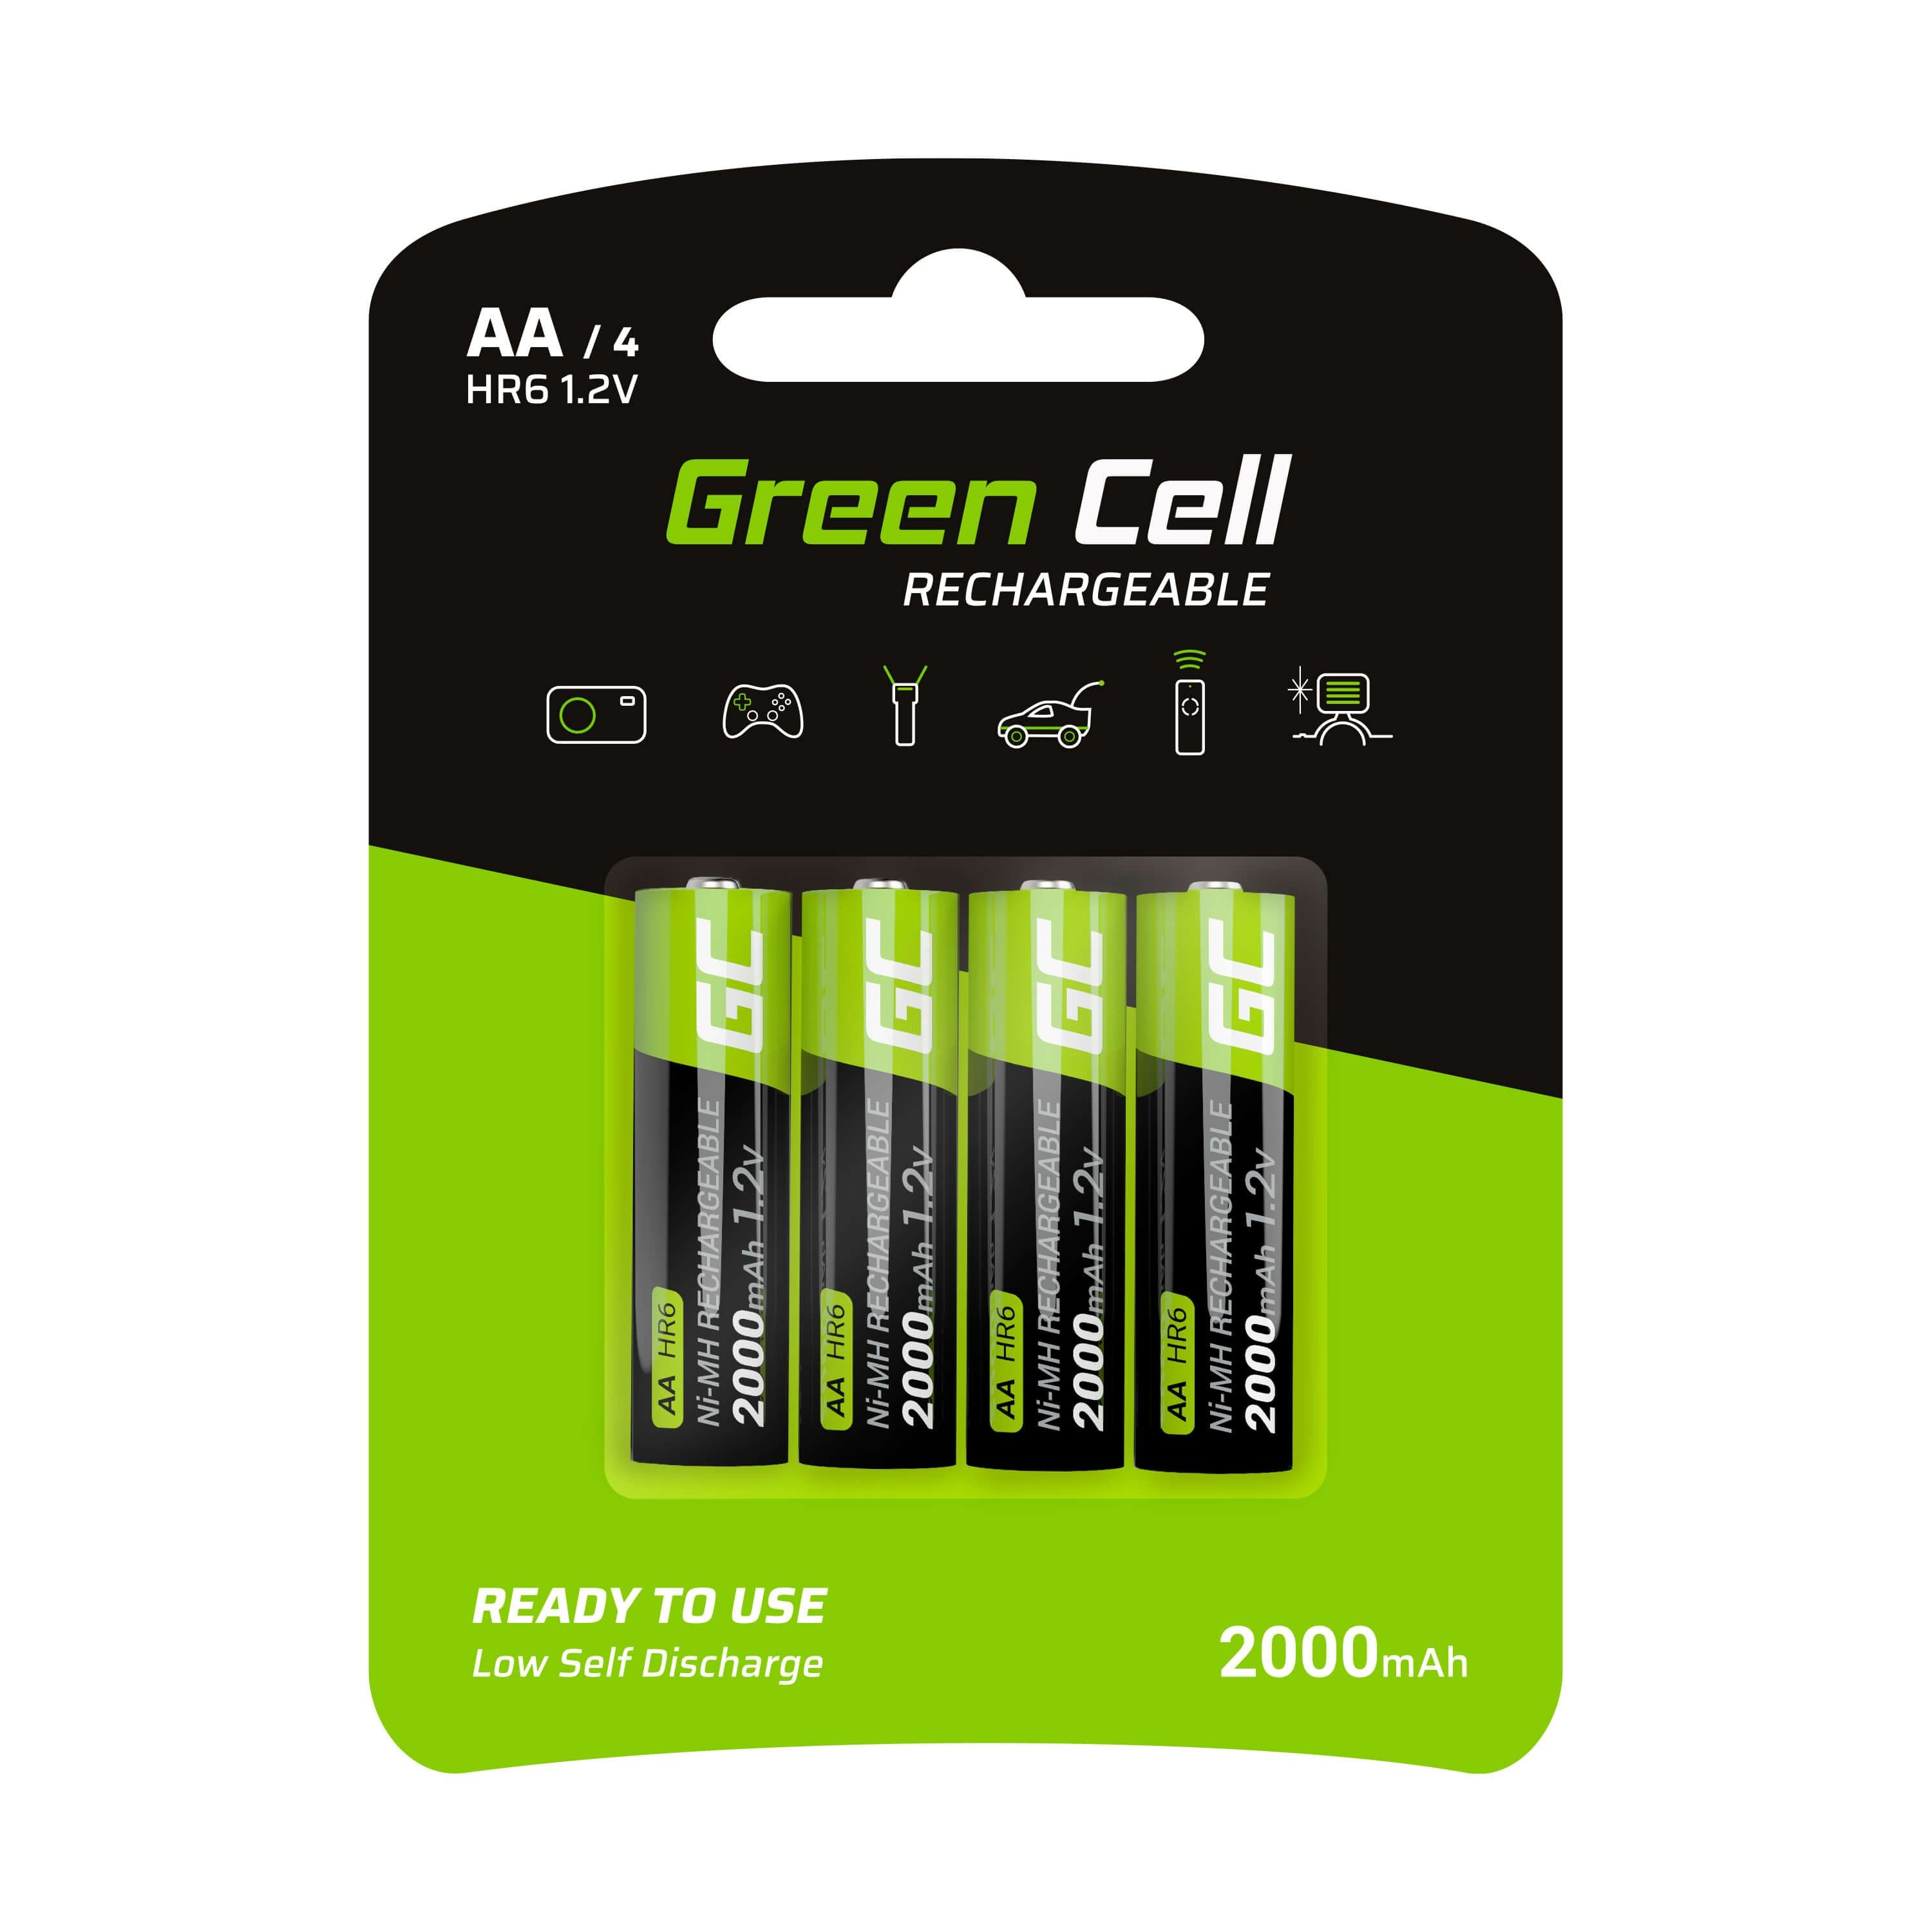 Green Cell GR02 household battery Rechargeable battery AA Nickel-Metal Hydride (NiMH) 4x AA HR6 2000 mAh_1